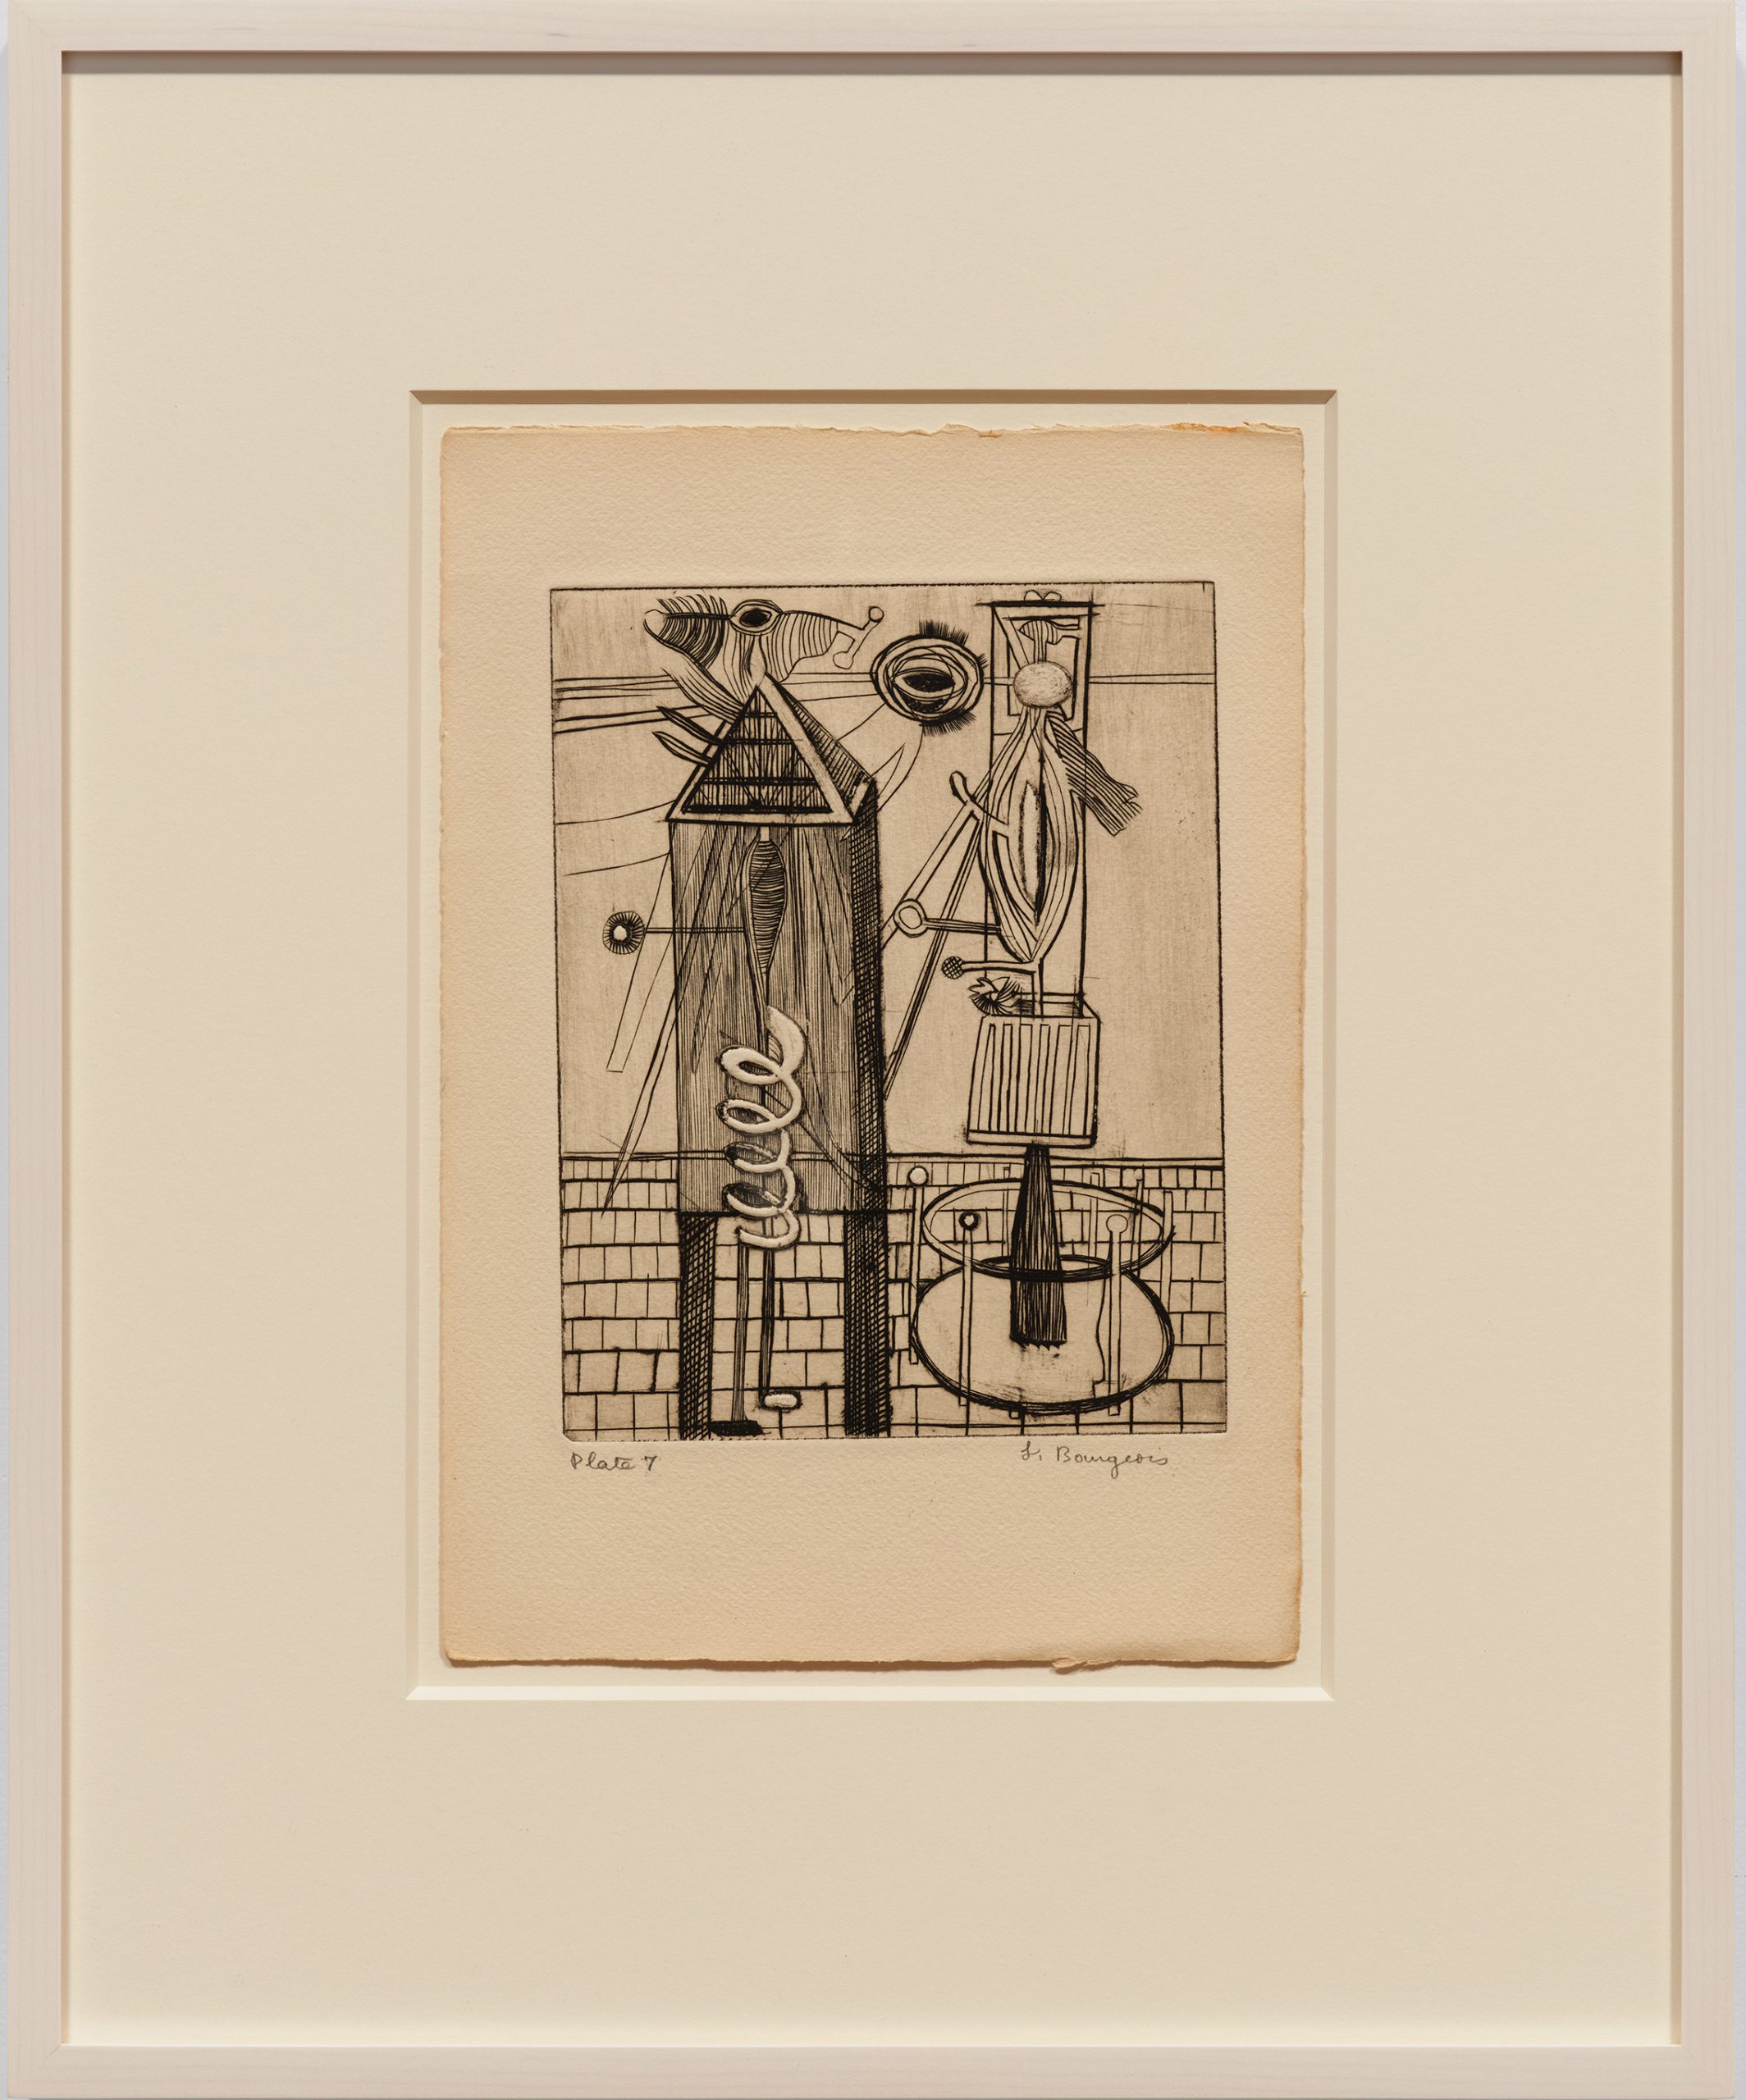 He Disappeared into Complete Silence, Plate 7 by Louise Bourgeois